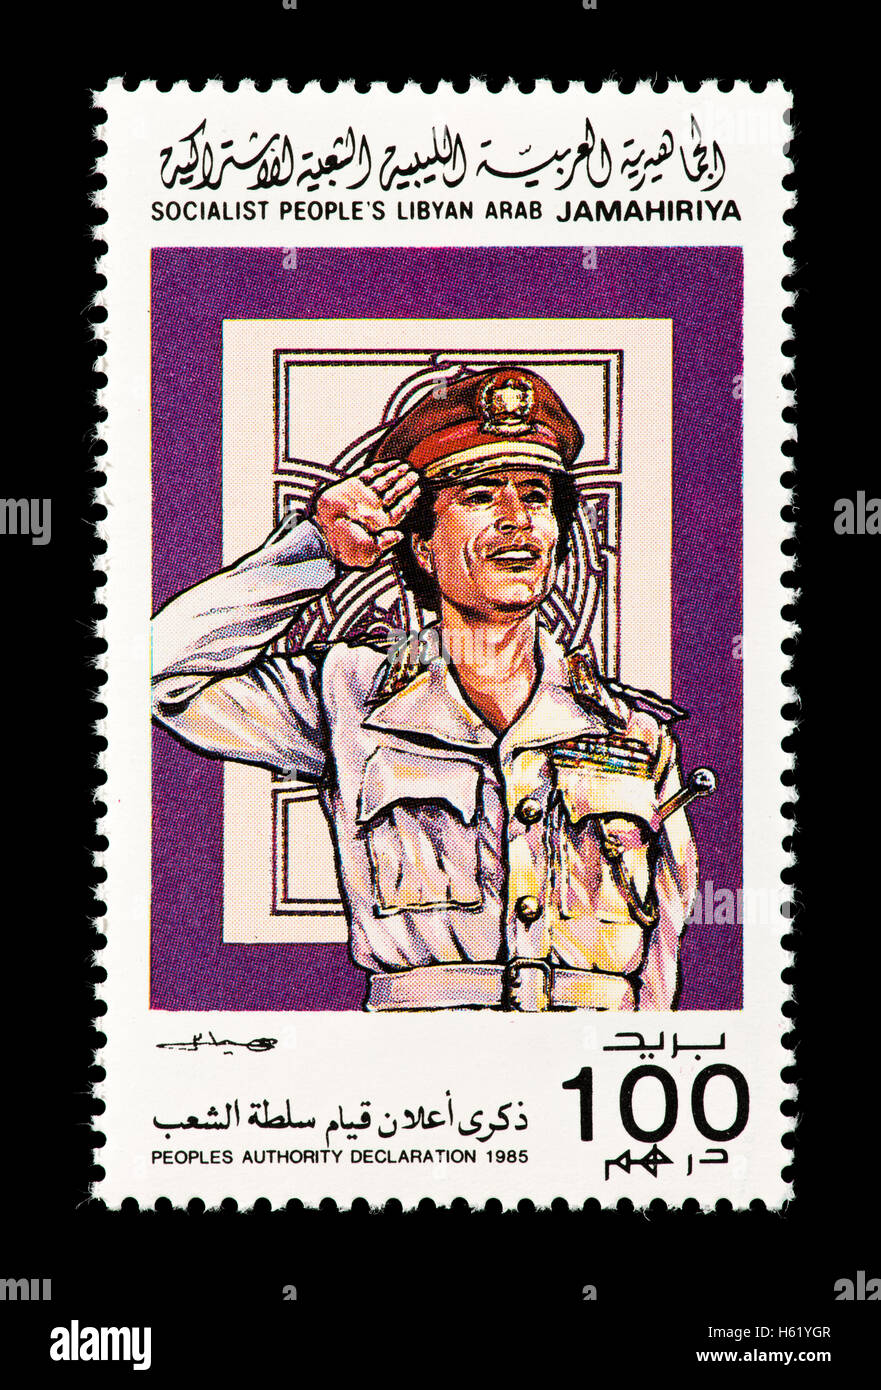 Postage stamp from Libya depicting Khadafy in a military uniform. Stock Photo